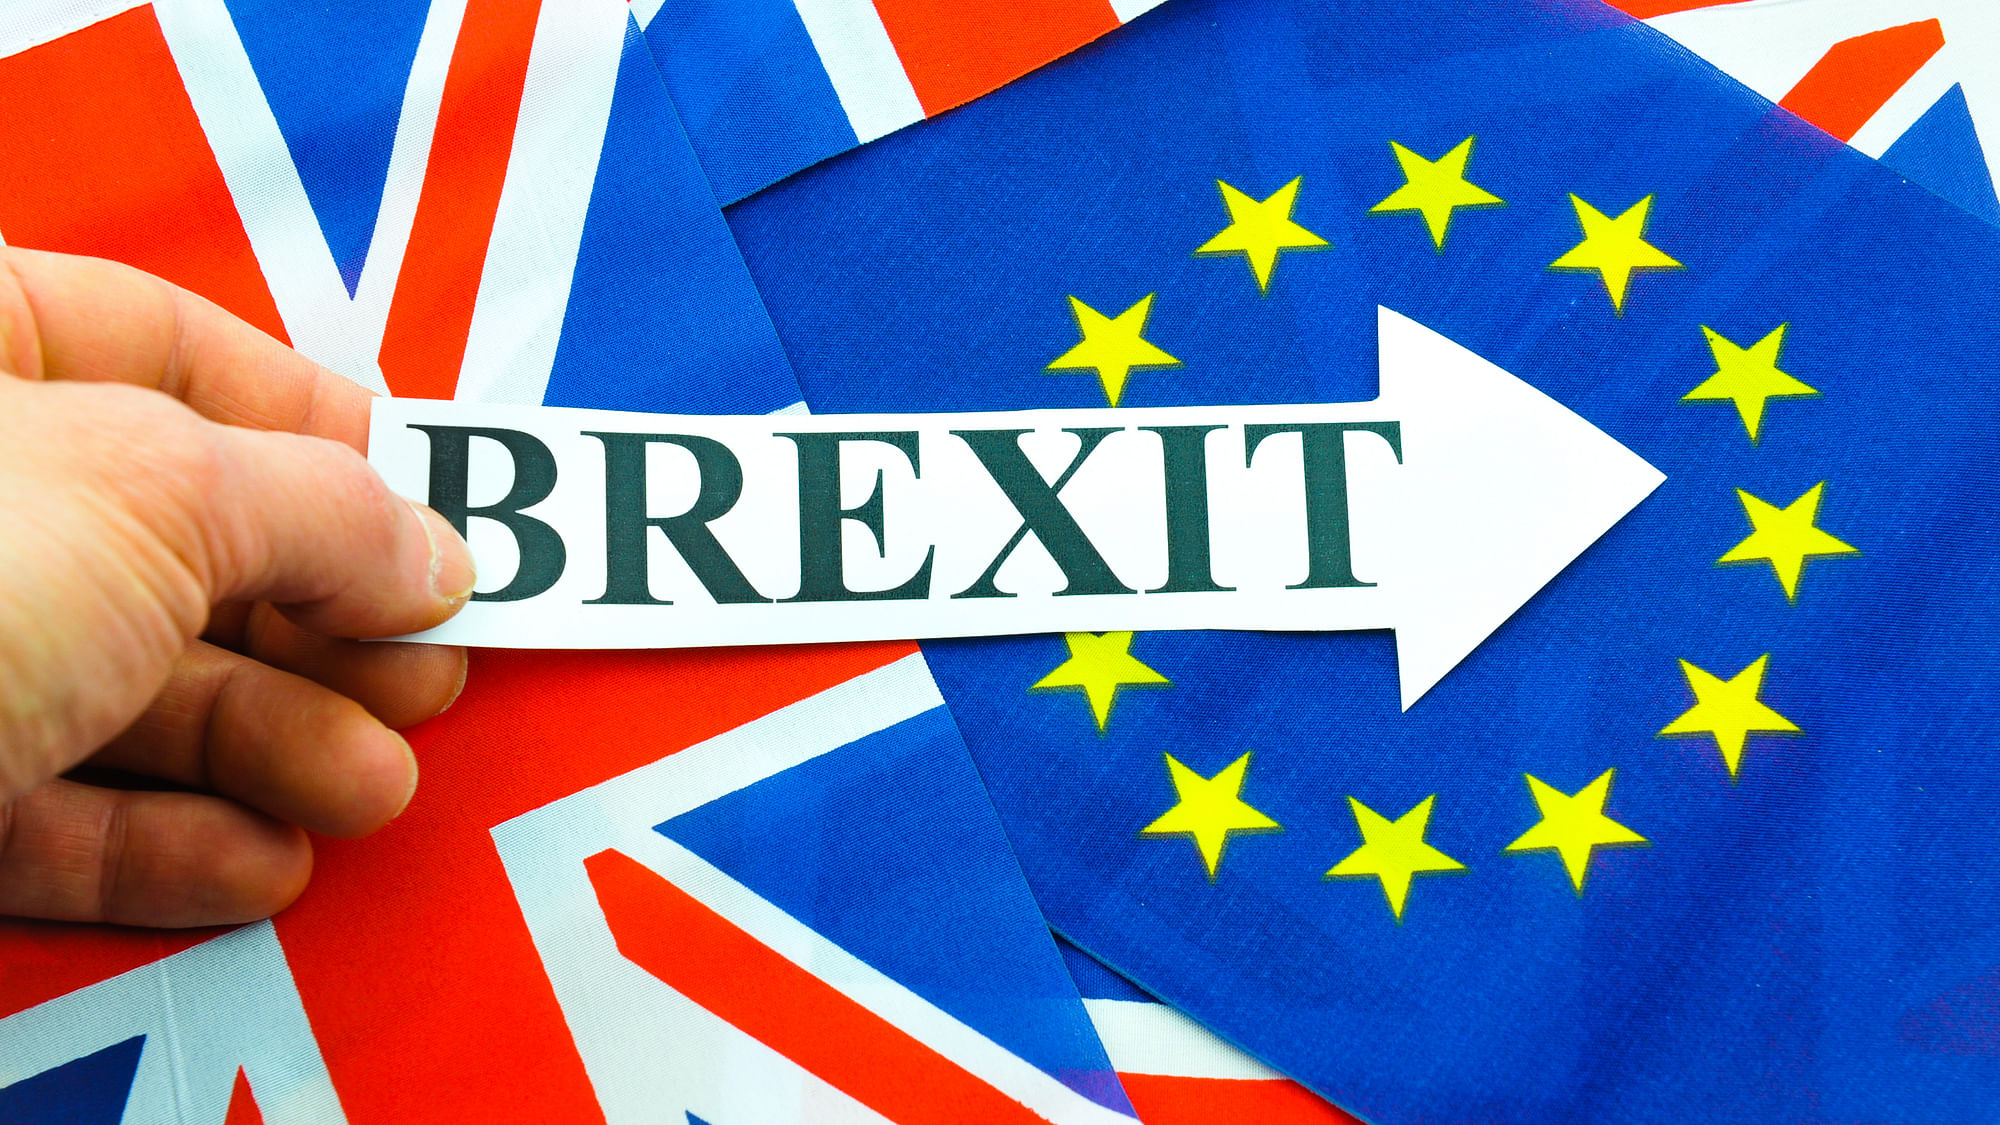 Britain has voted to leave the European Union after the referendum held on 23 June. (Photo: iStockphoto)